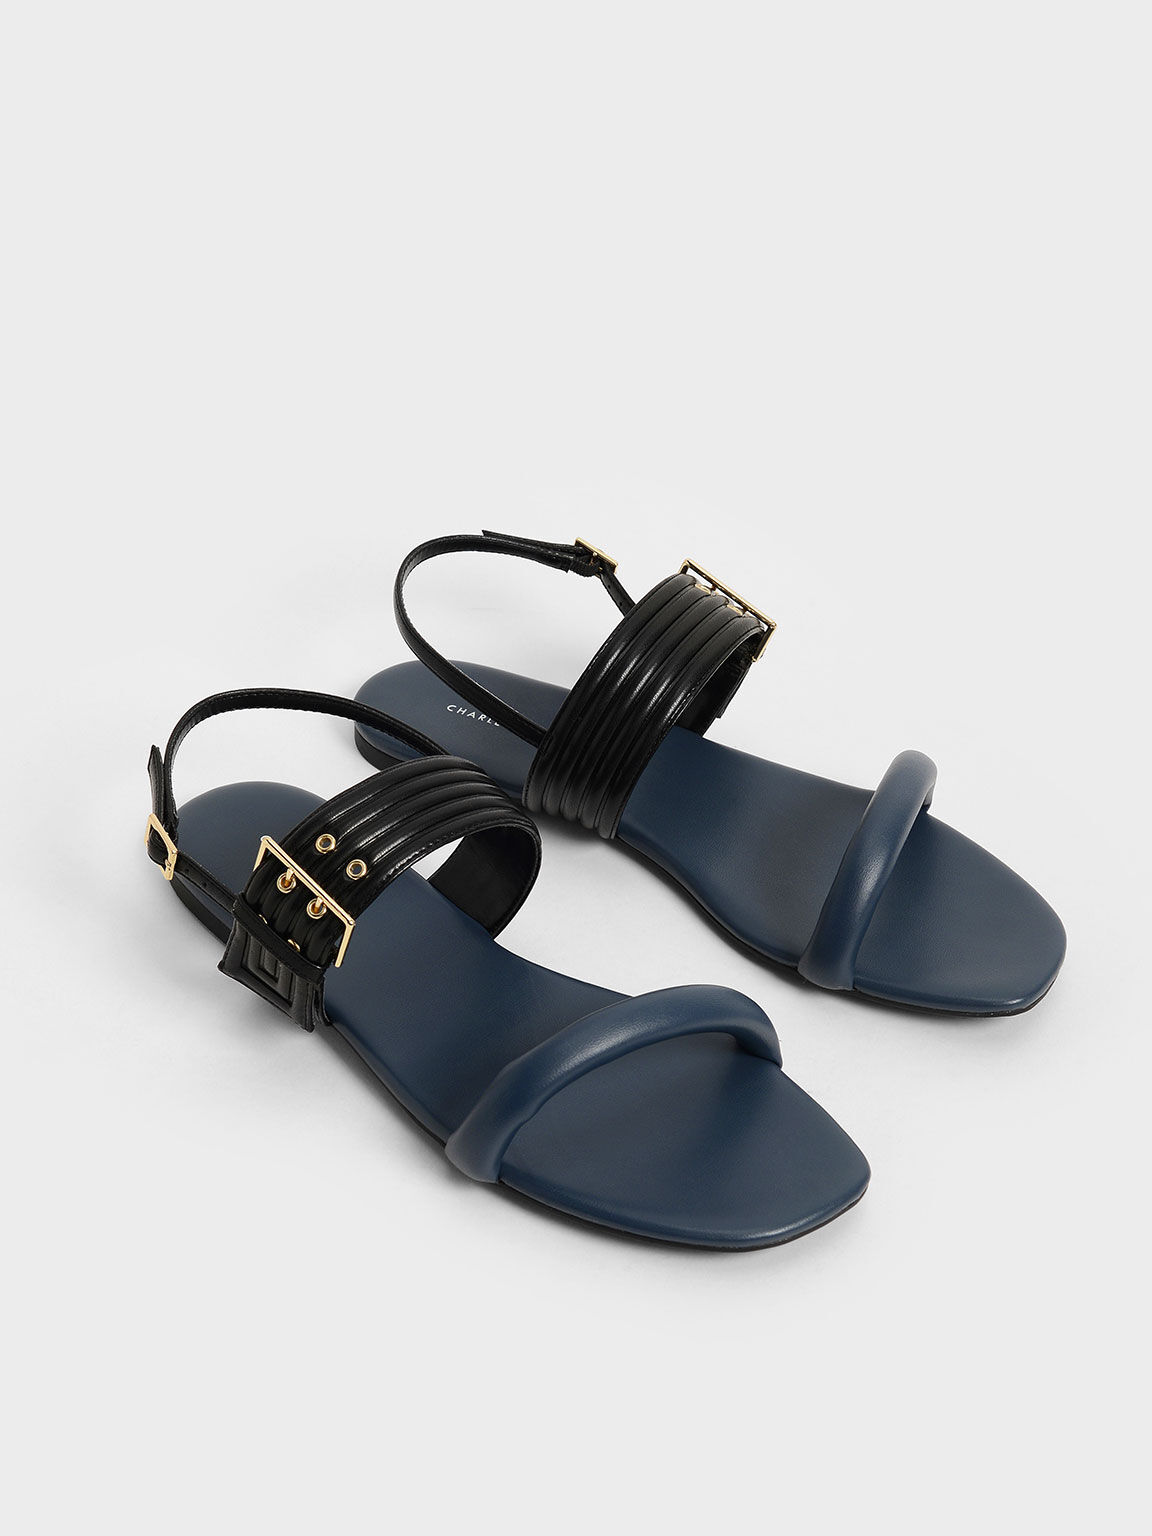 Two-Tone Puffy Grommet Sandals, Blue, hi-res